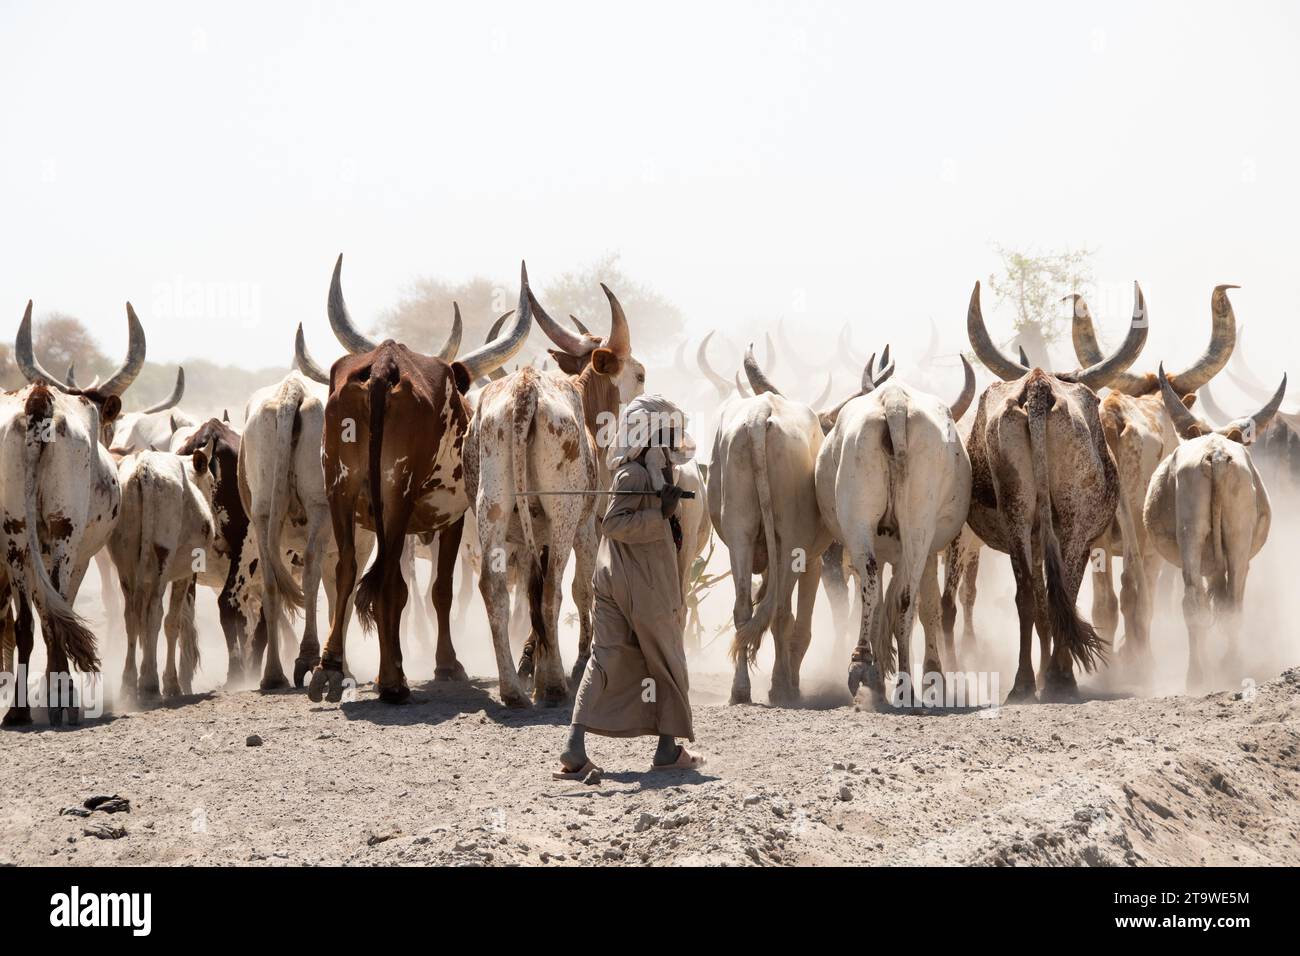 Young shepherd in Chad next to Lake Chad Stock Photo